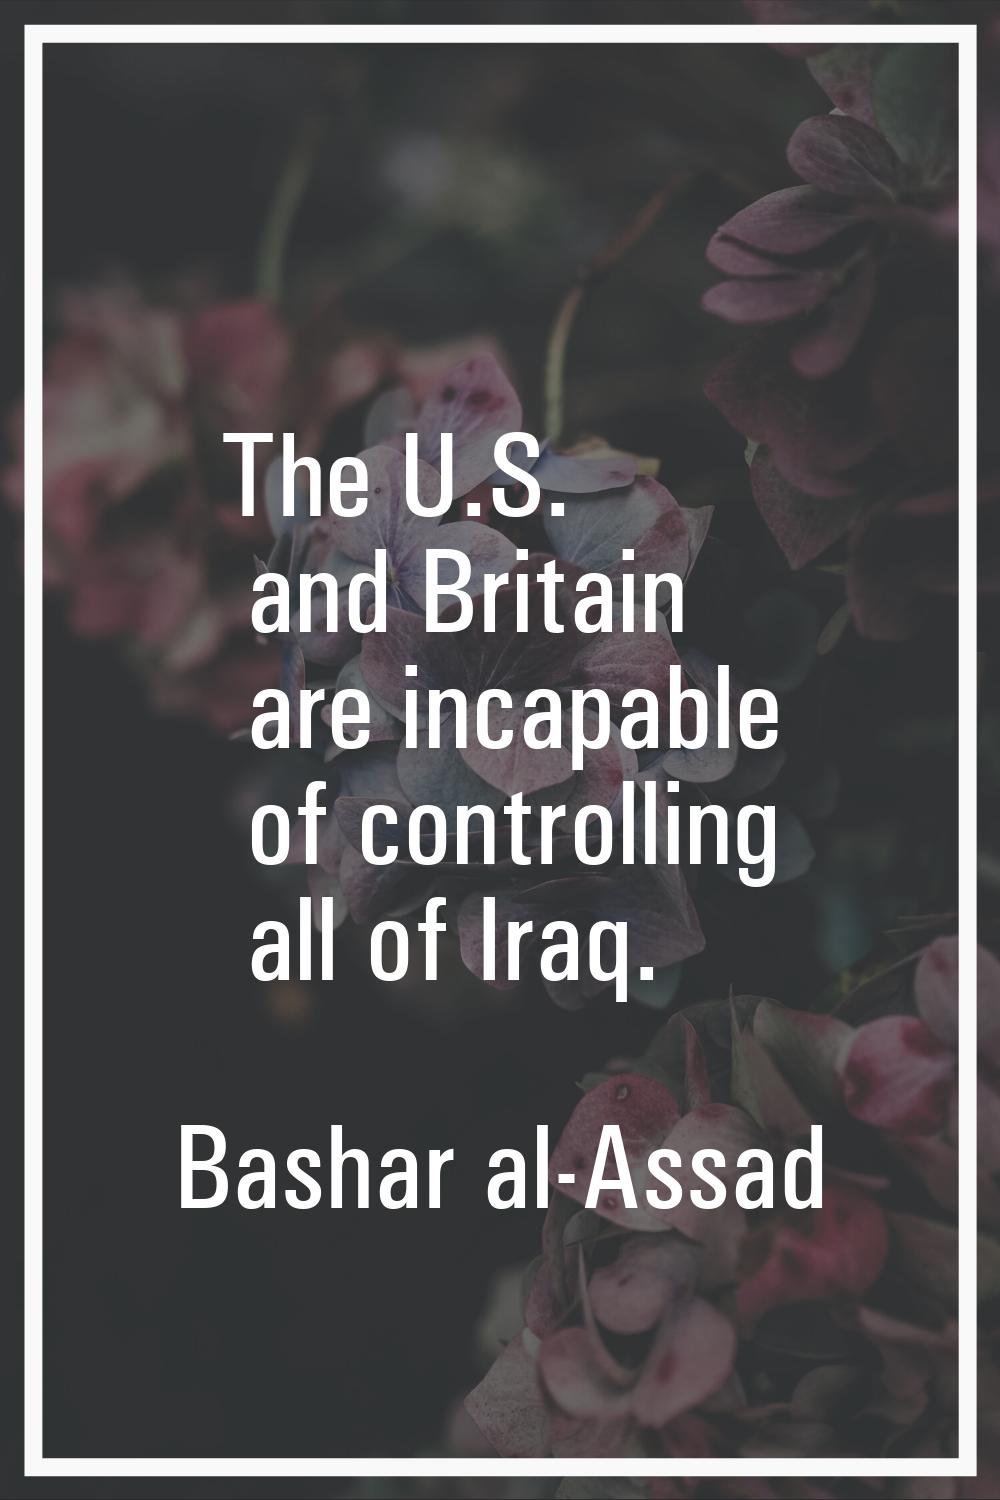 The U.S. and Britain are incapable of controlling all of Iraq.